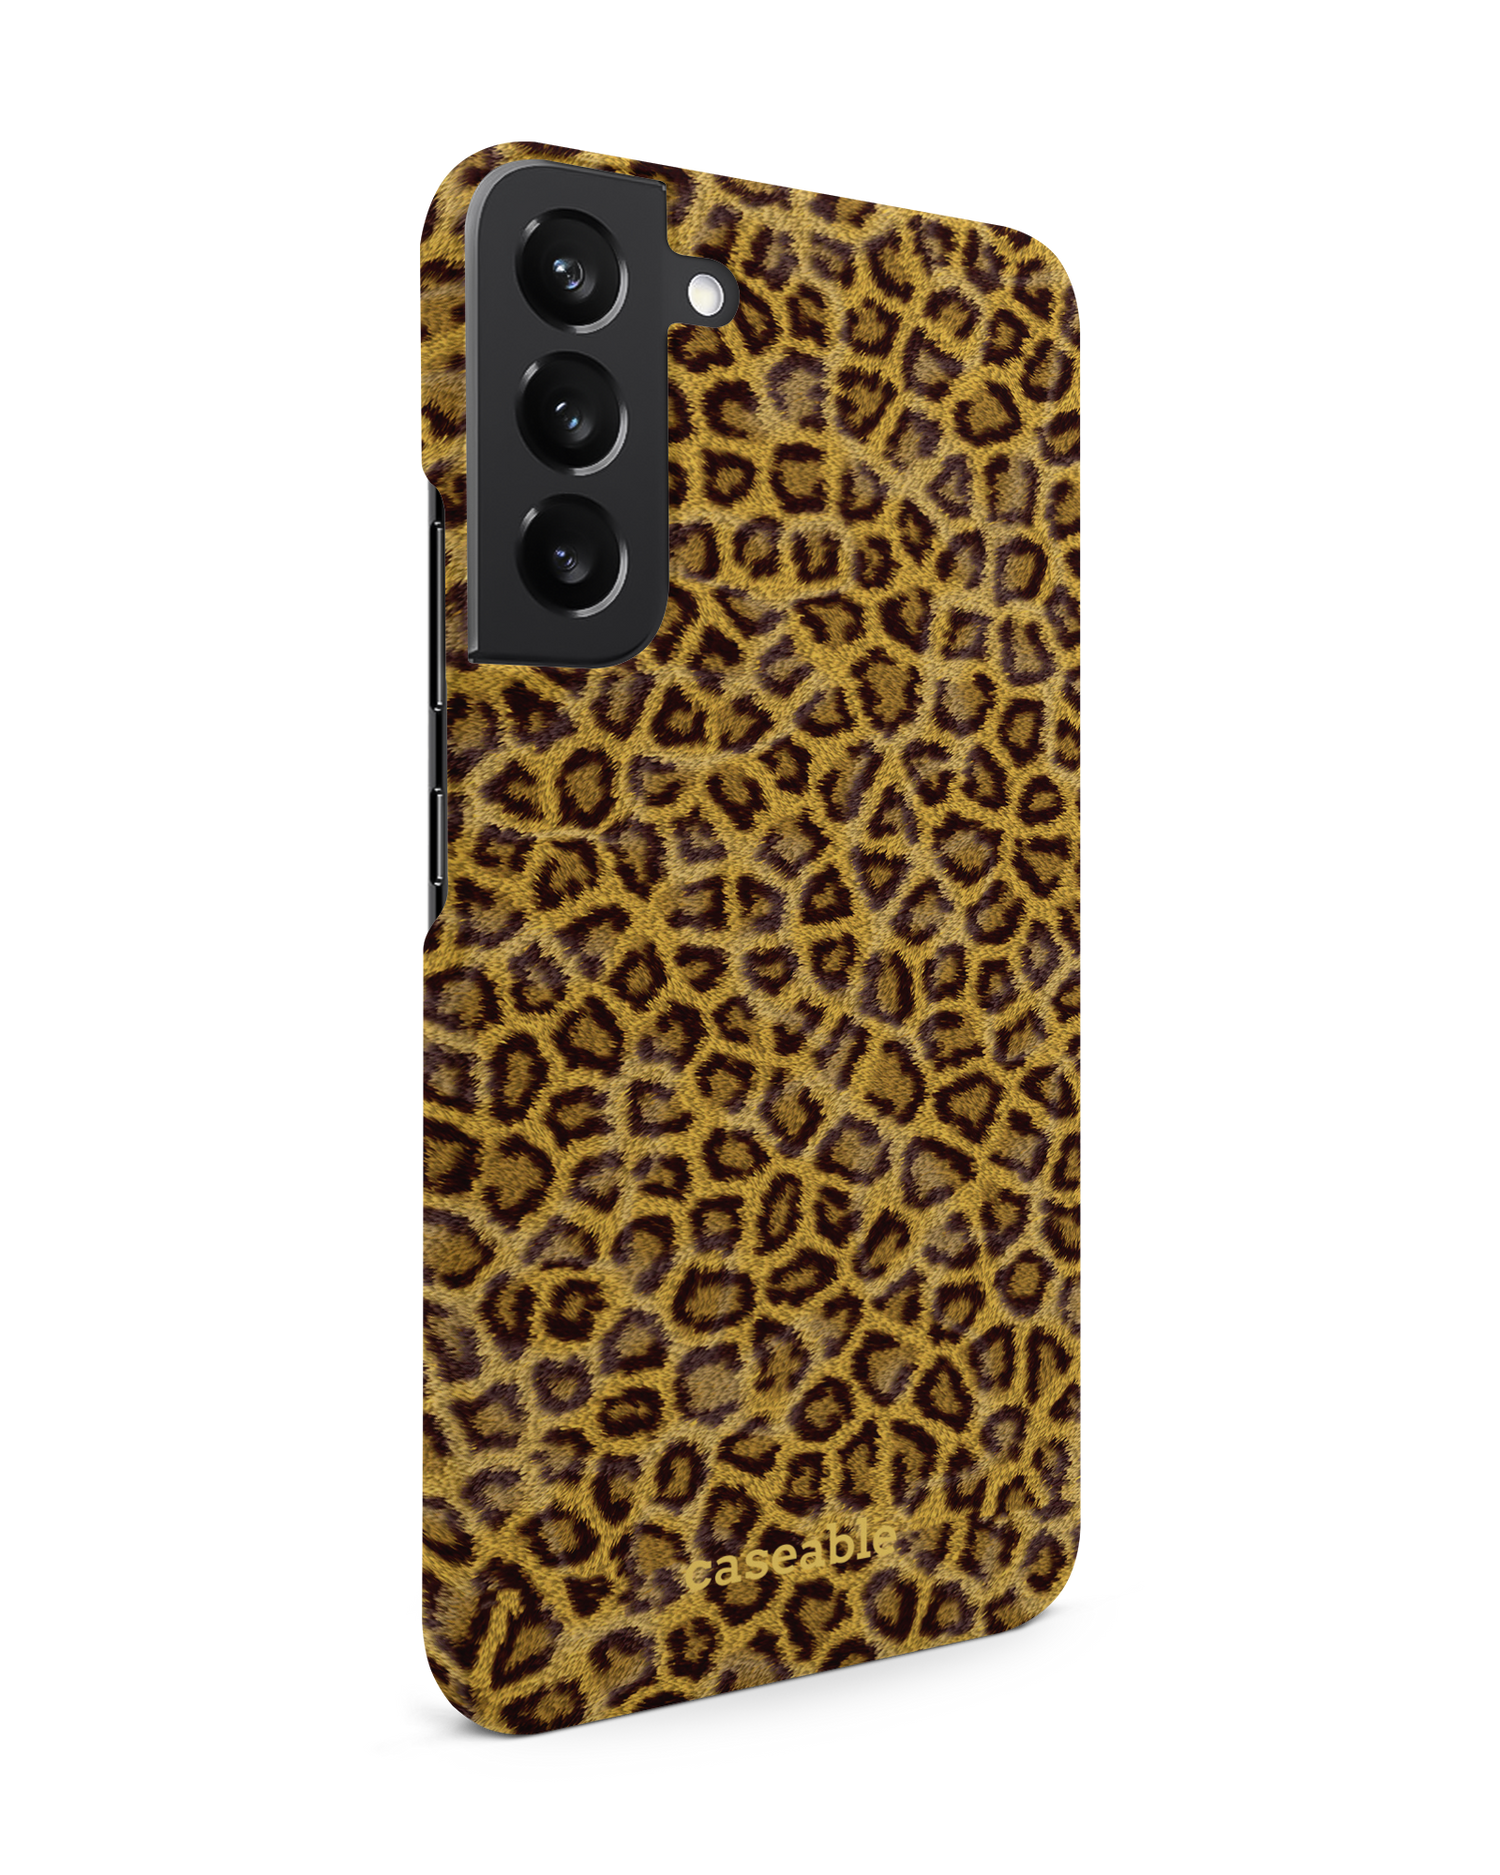 Leopard Skin Hard Shell Phone Case Samsung Galaxy S22 Plus 5G: View from the left side